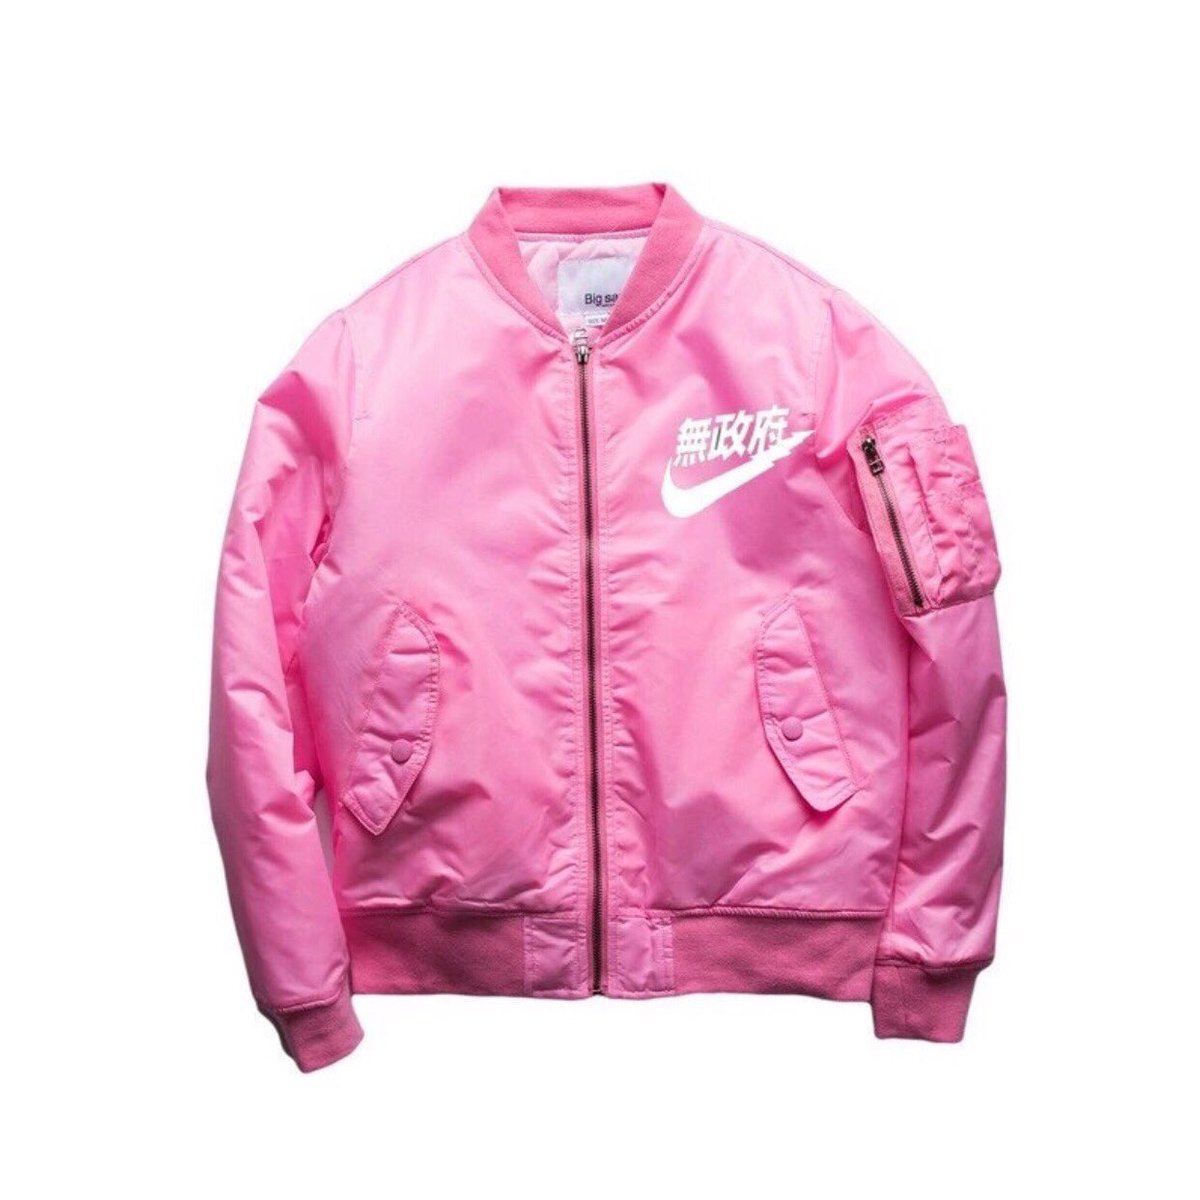 Vash The Stampede on Twitter: "💞THIS PINK BOMBER IS LIT💞 use promo "PREE" for off... https://t.co/4US720nxmz by #Melaninful via @c0nvey https://t.co/TzCiUfbHV5" / Twitter